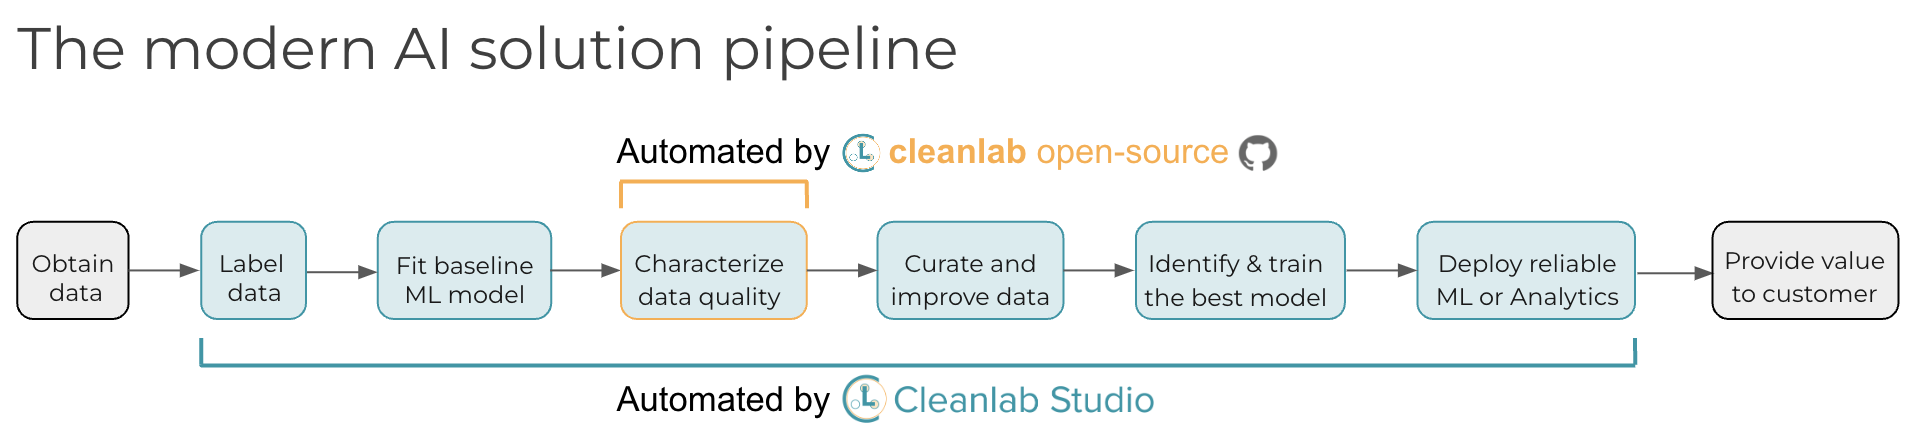 Overview of modern AI pipeline